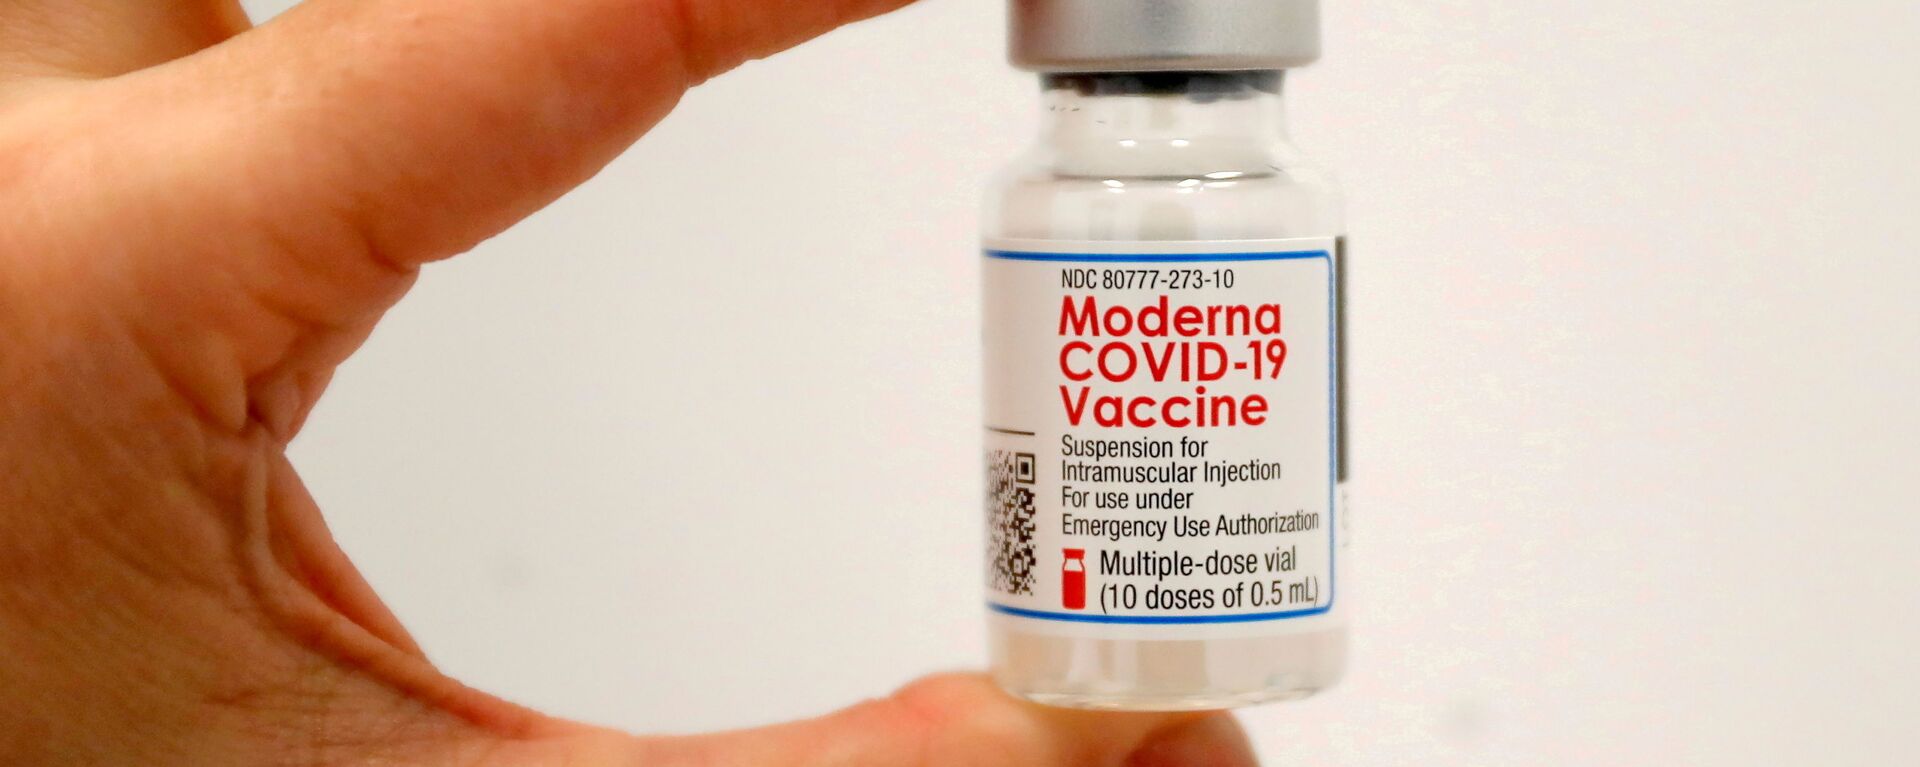 A healthcare worker holds a vial of the Moderna COVID-19 Vaccine at a pop-up vaccination site operated by SOMOS Community Care during the coronavirus disease (COVID-19) pandemic in Manhattan in New York City, New York, U.S., January 29, 2021. - Sputnik International, 1920, 13.08.2021